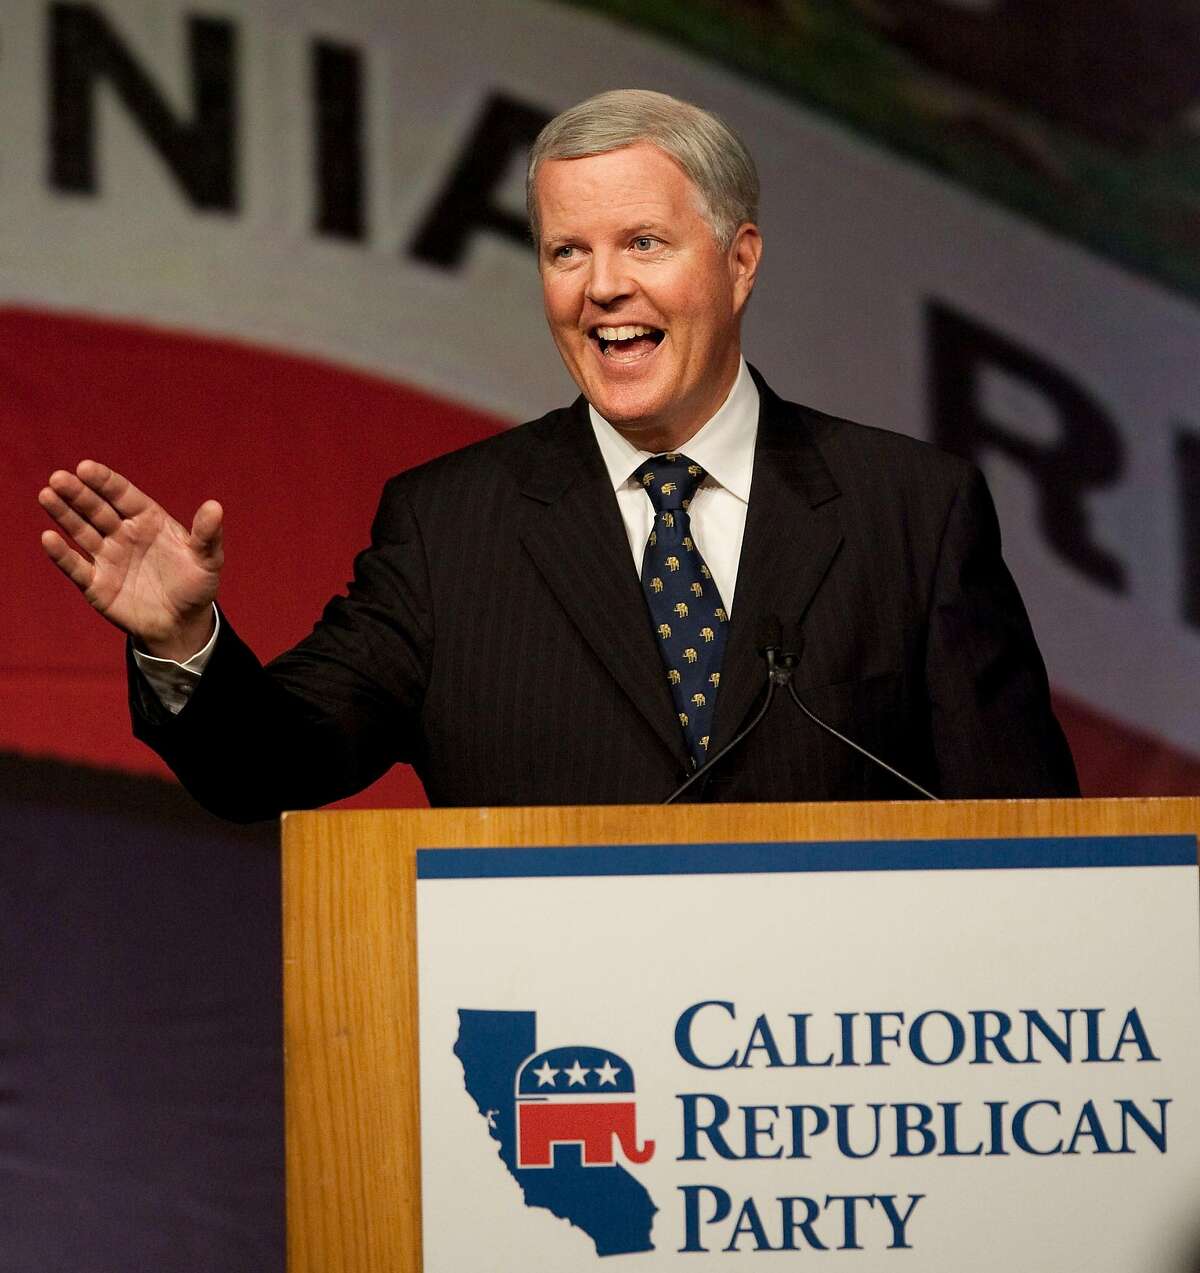 Former congressman Tom Campbell speaks during the California Republican Convention in Indian Wells, Calif., on Friday, Sept. 25, 2009. Campbell is running for Governor of California. (AP Photo/Francis Specker)